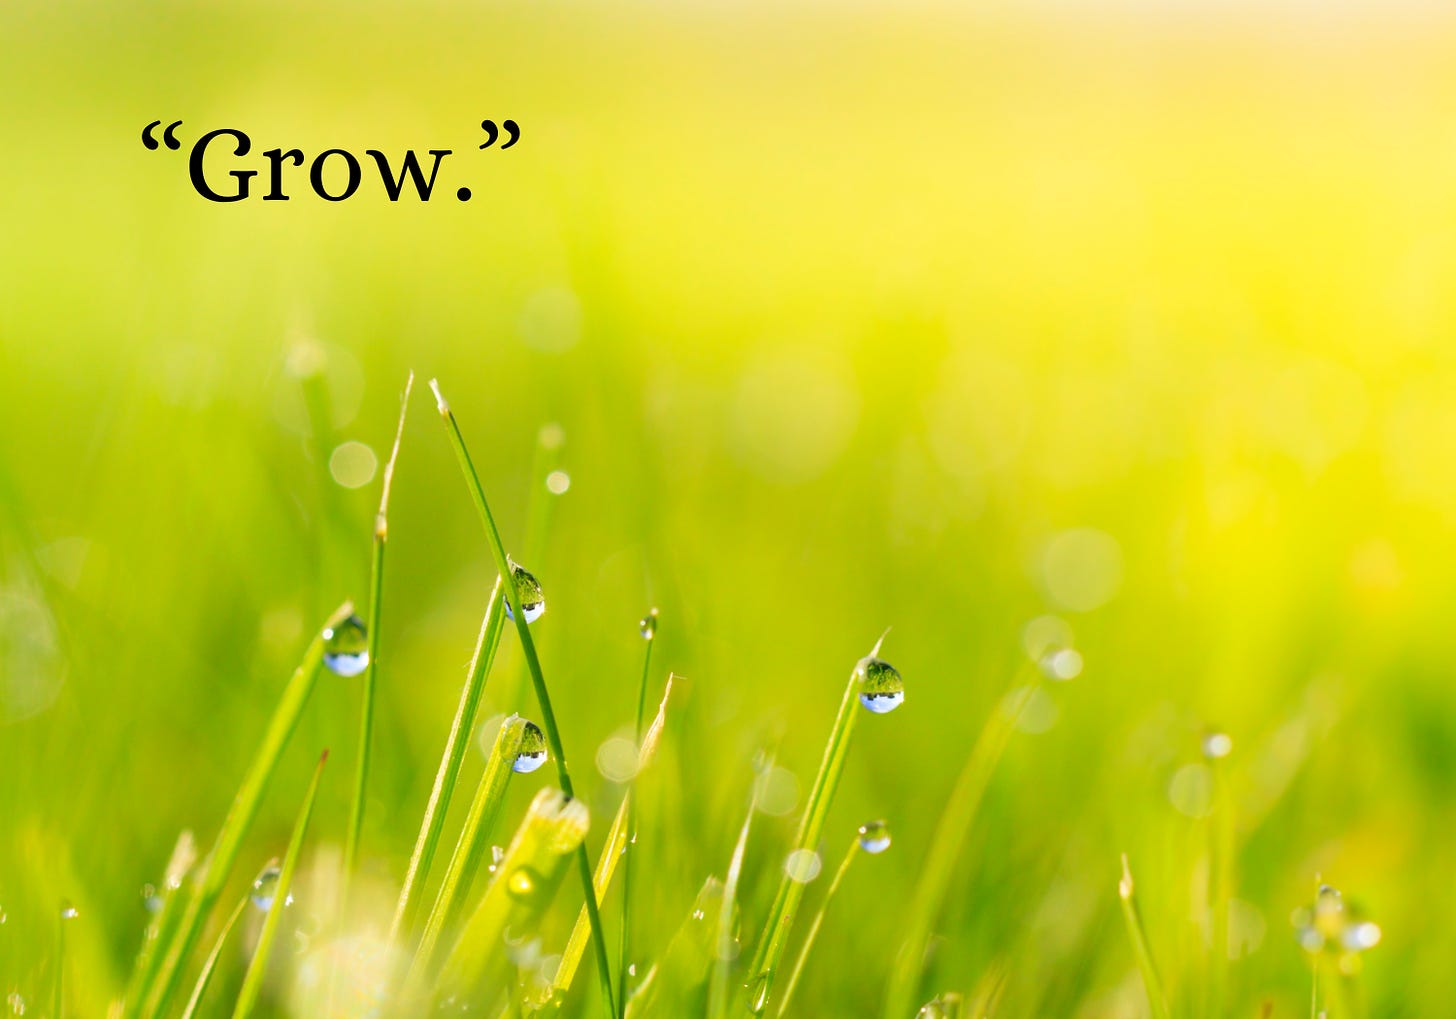 Blades of grass with droplets of water and the text "Grow."